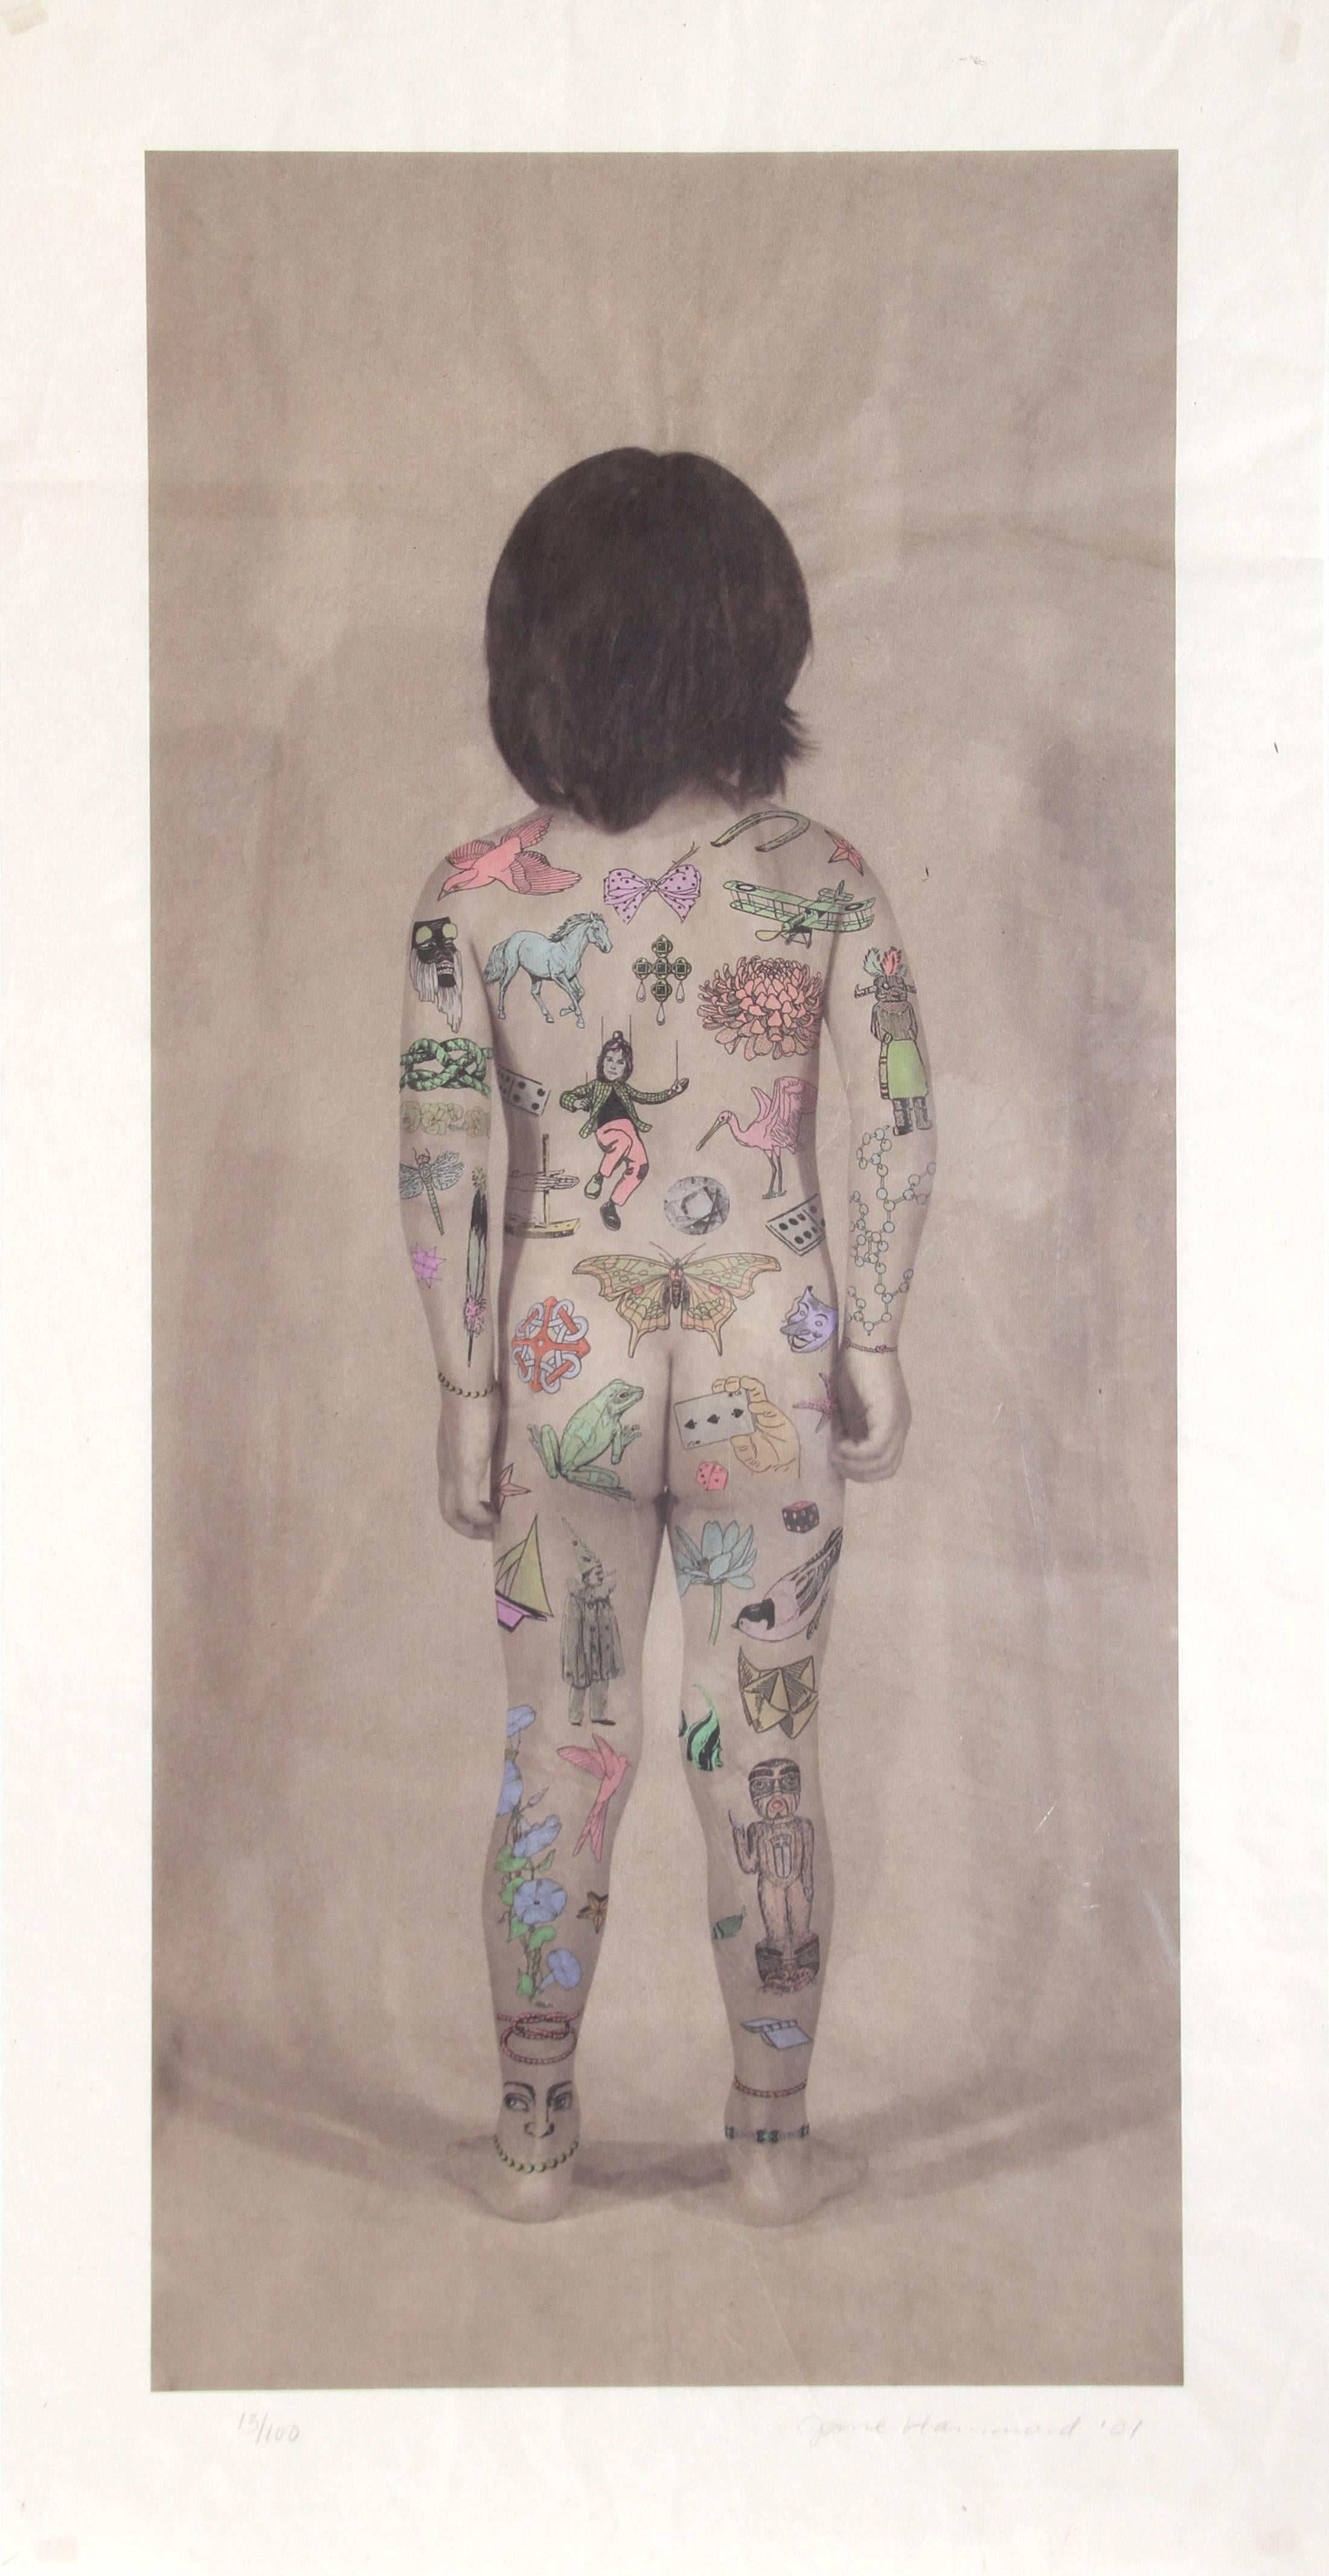 Artist: Jane Hammond
Title: Body Language from the Doctor's of the World Portfolio
Year: 2001
Medium: Pigmented Digital Print, signed and numbered in pencil
Edition: 100
Image Size: 41 x 19 inches
Size: 47.5 x 24.5 in. (120.65 x 62.23 cm)